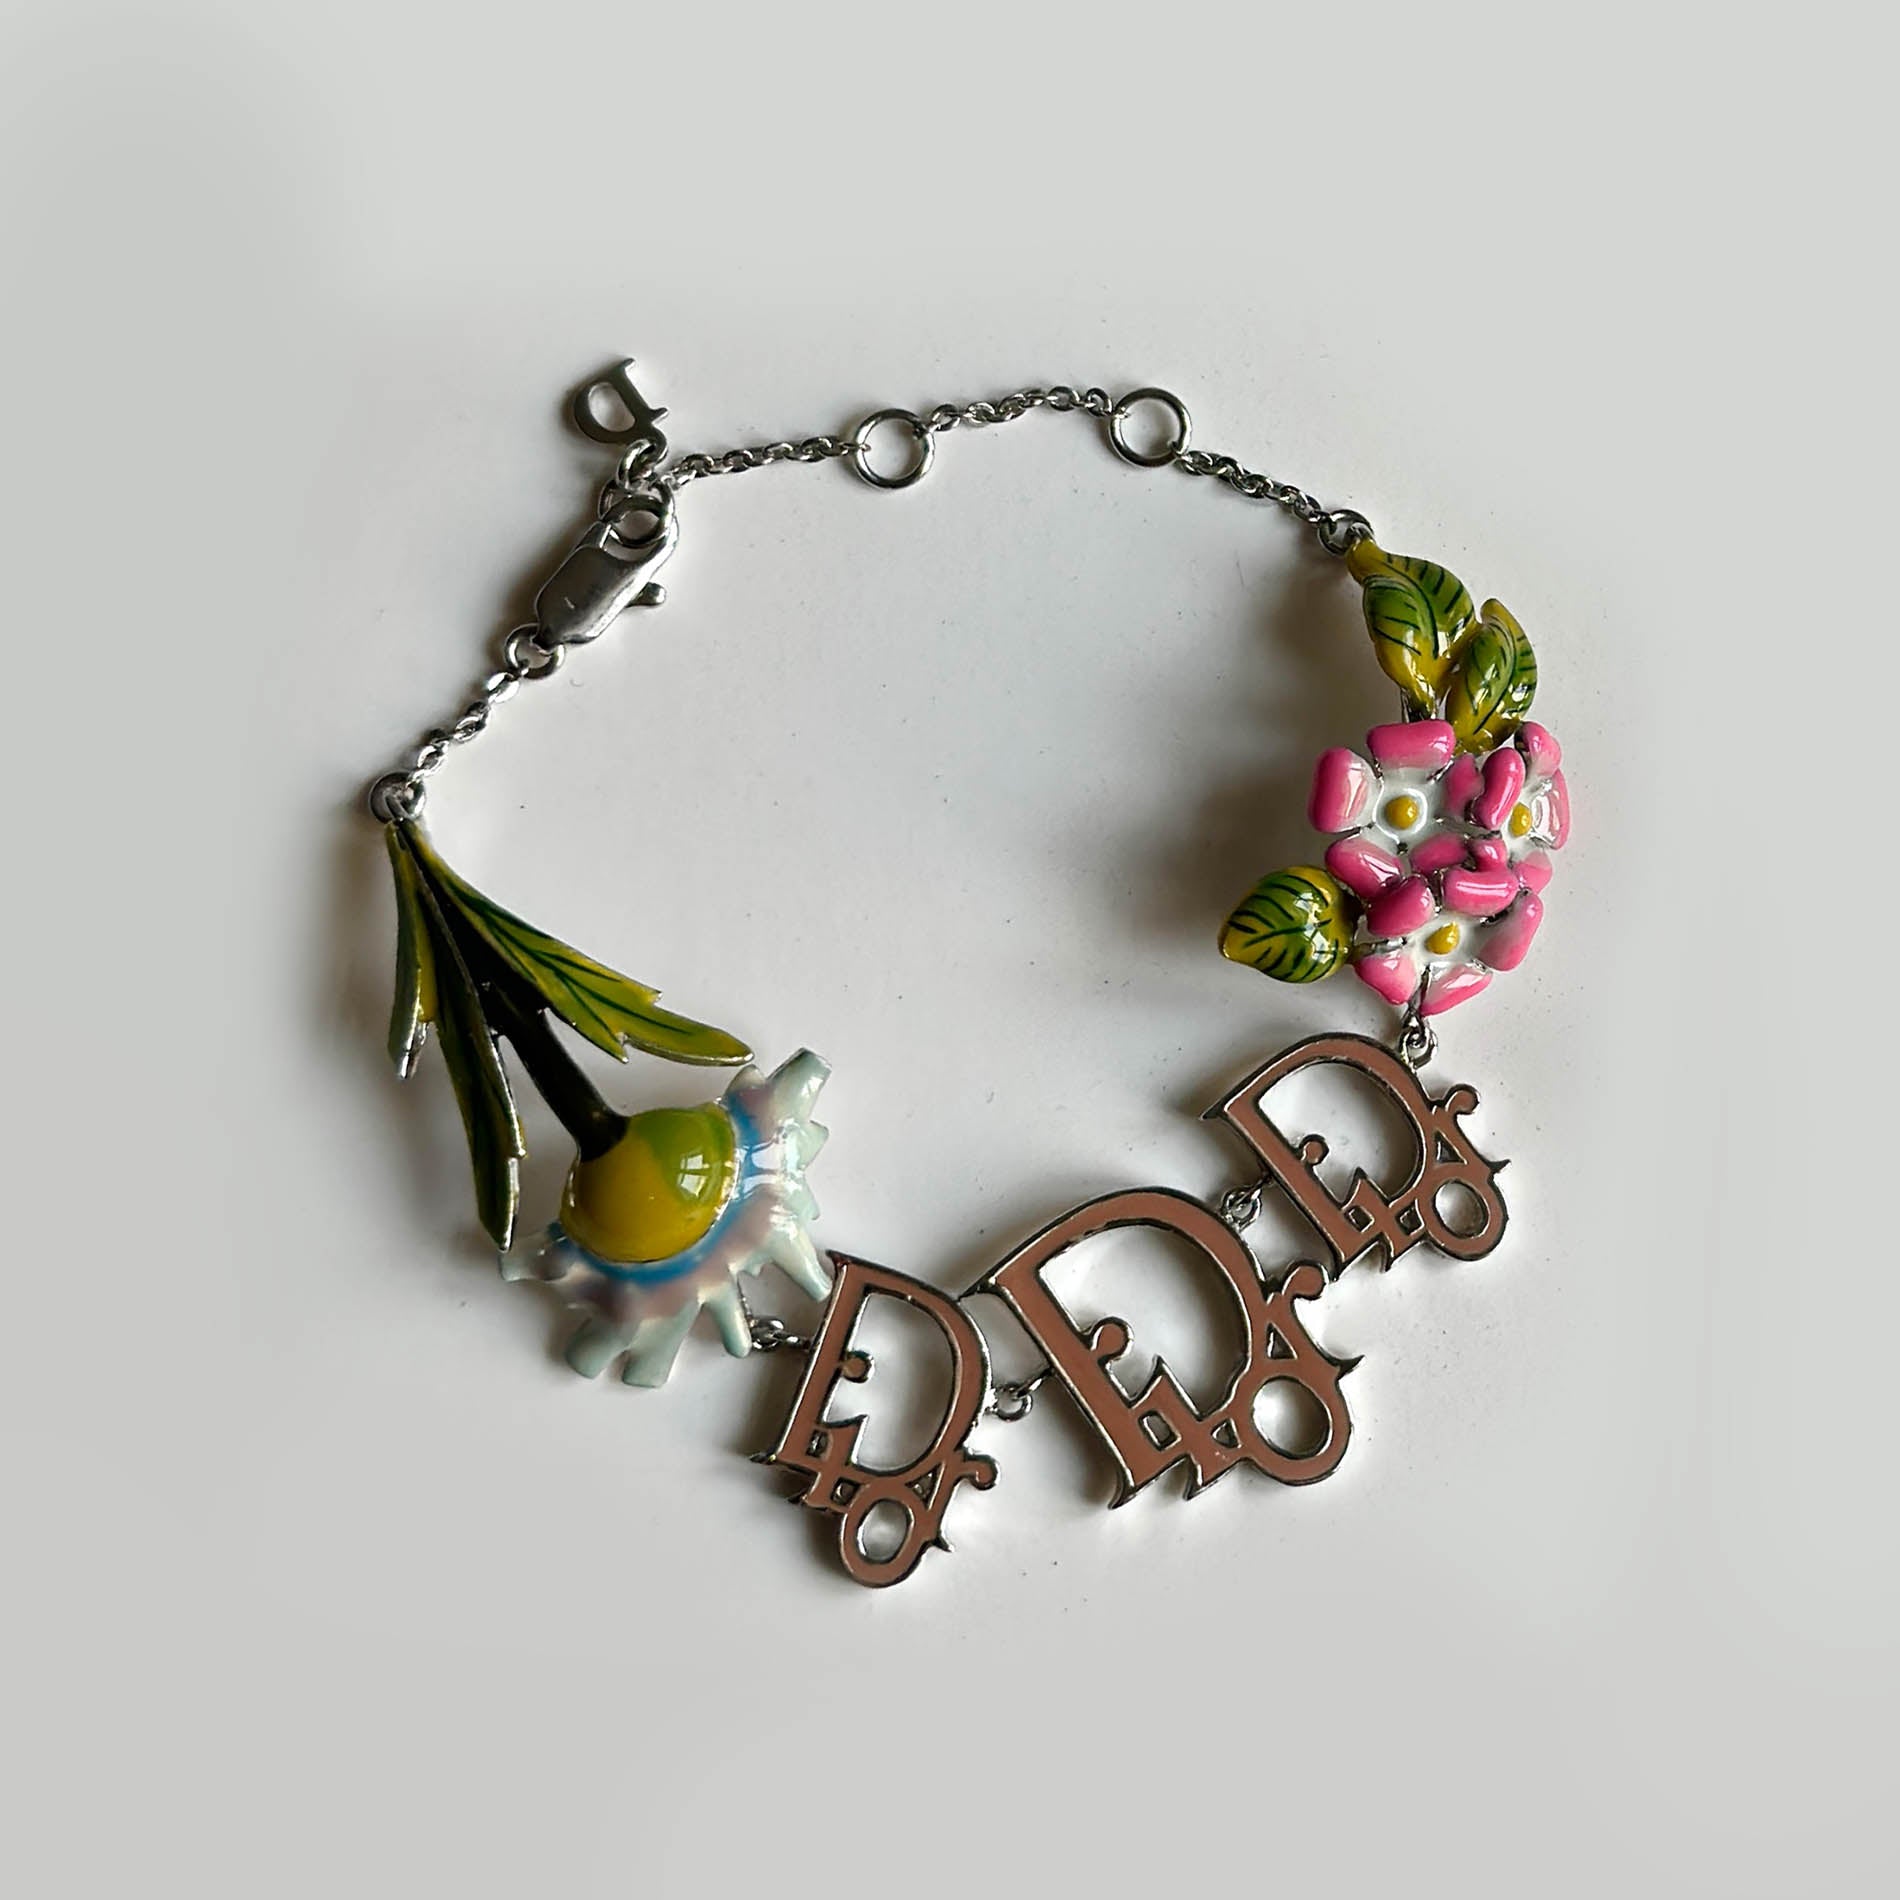 Christian Dior by John Galliano 2005 Floral Bracelet